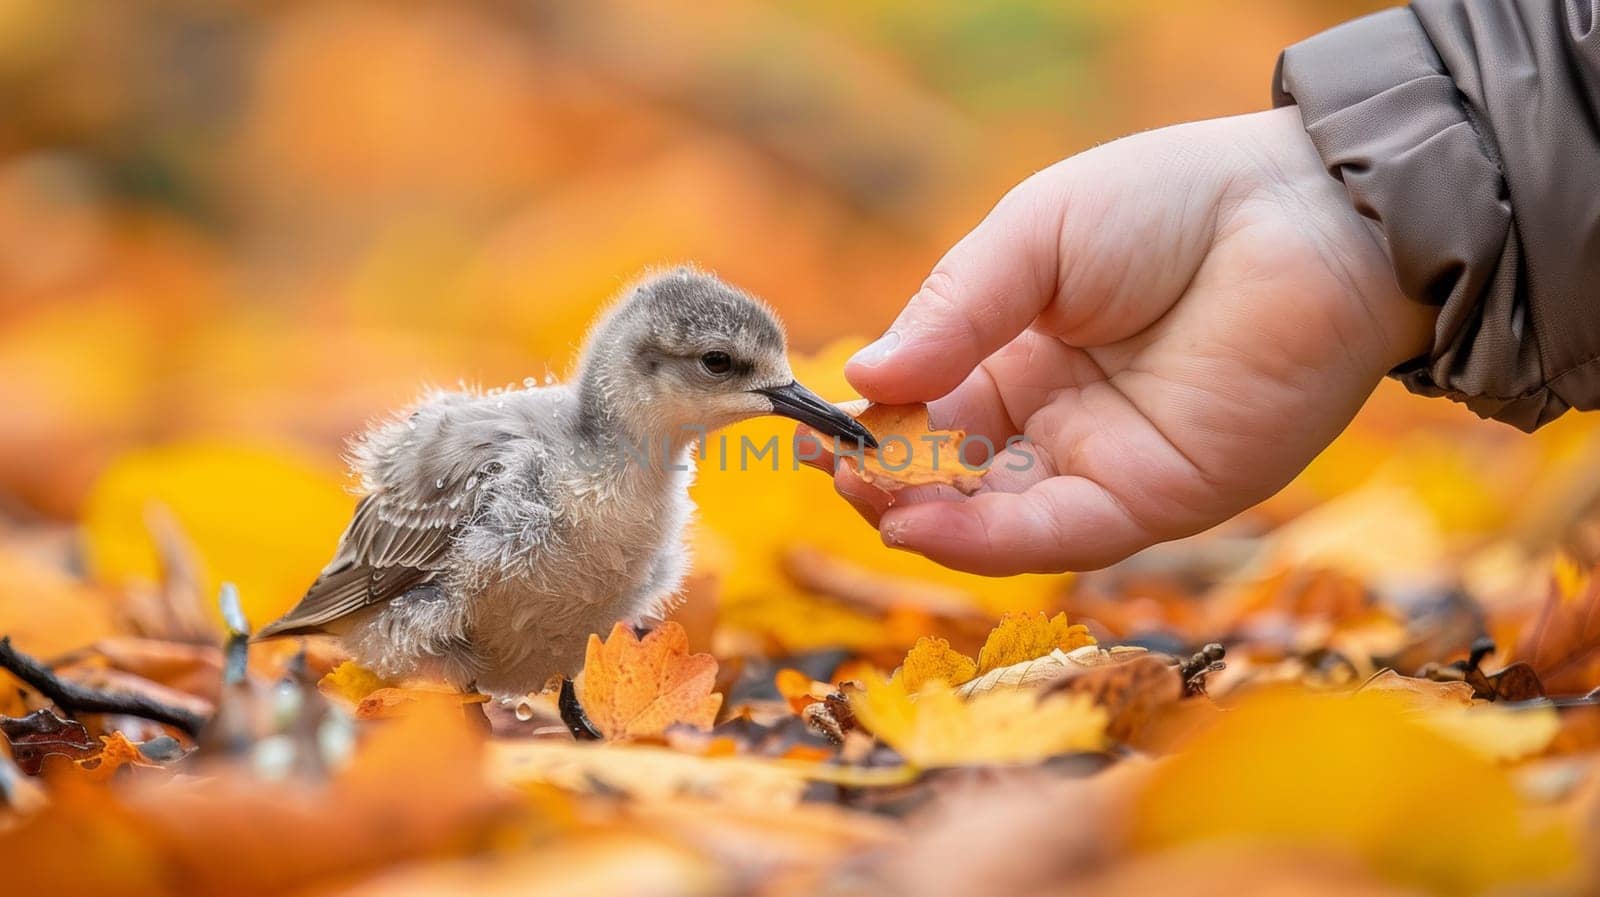 A small bird eating leaves from a hand of someone, AI by starush